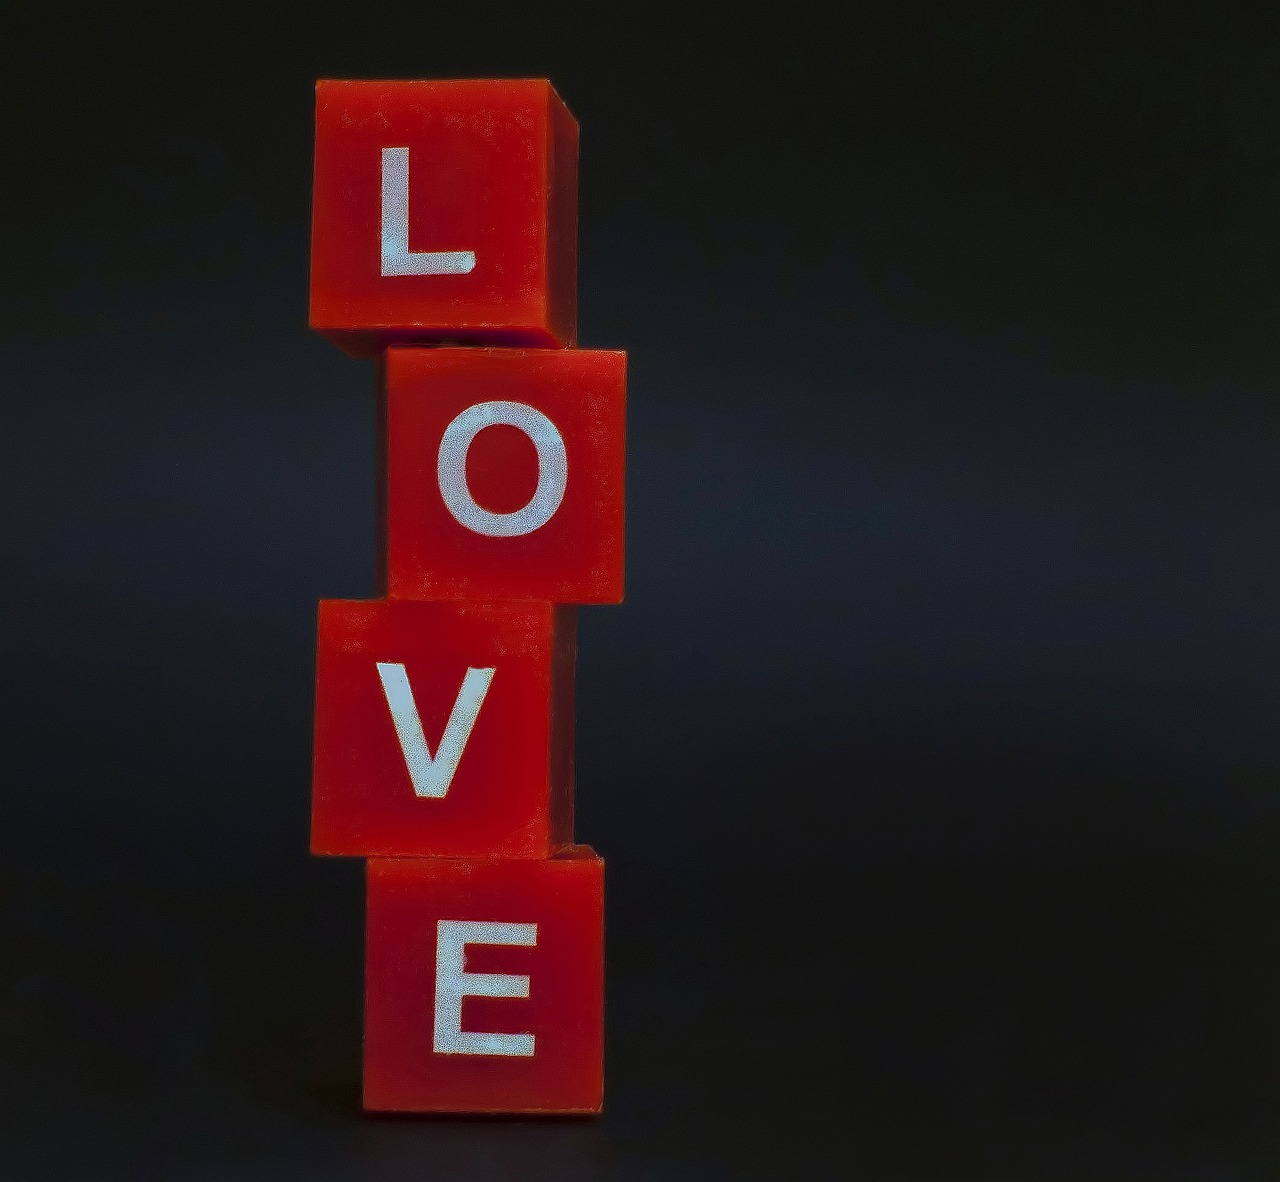 love letters cube free photo